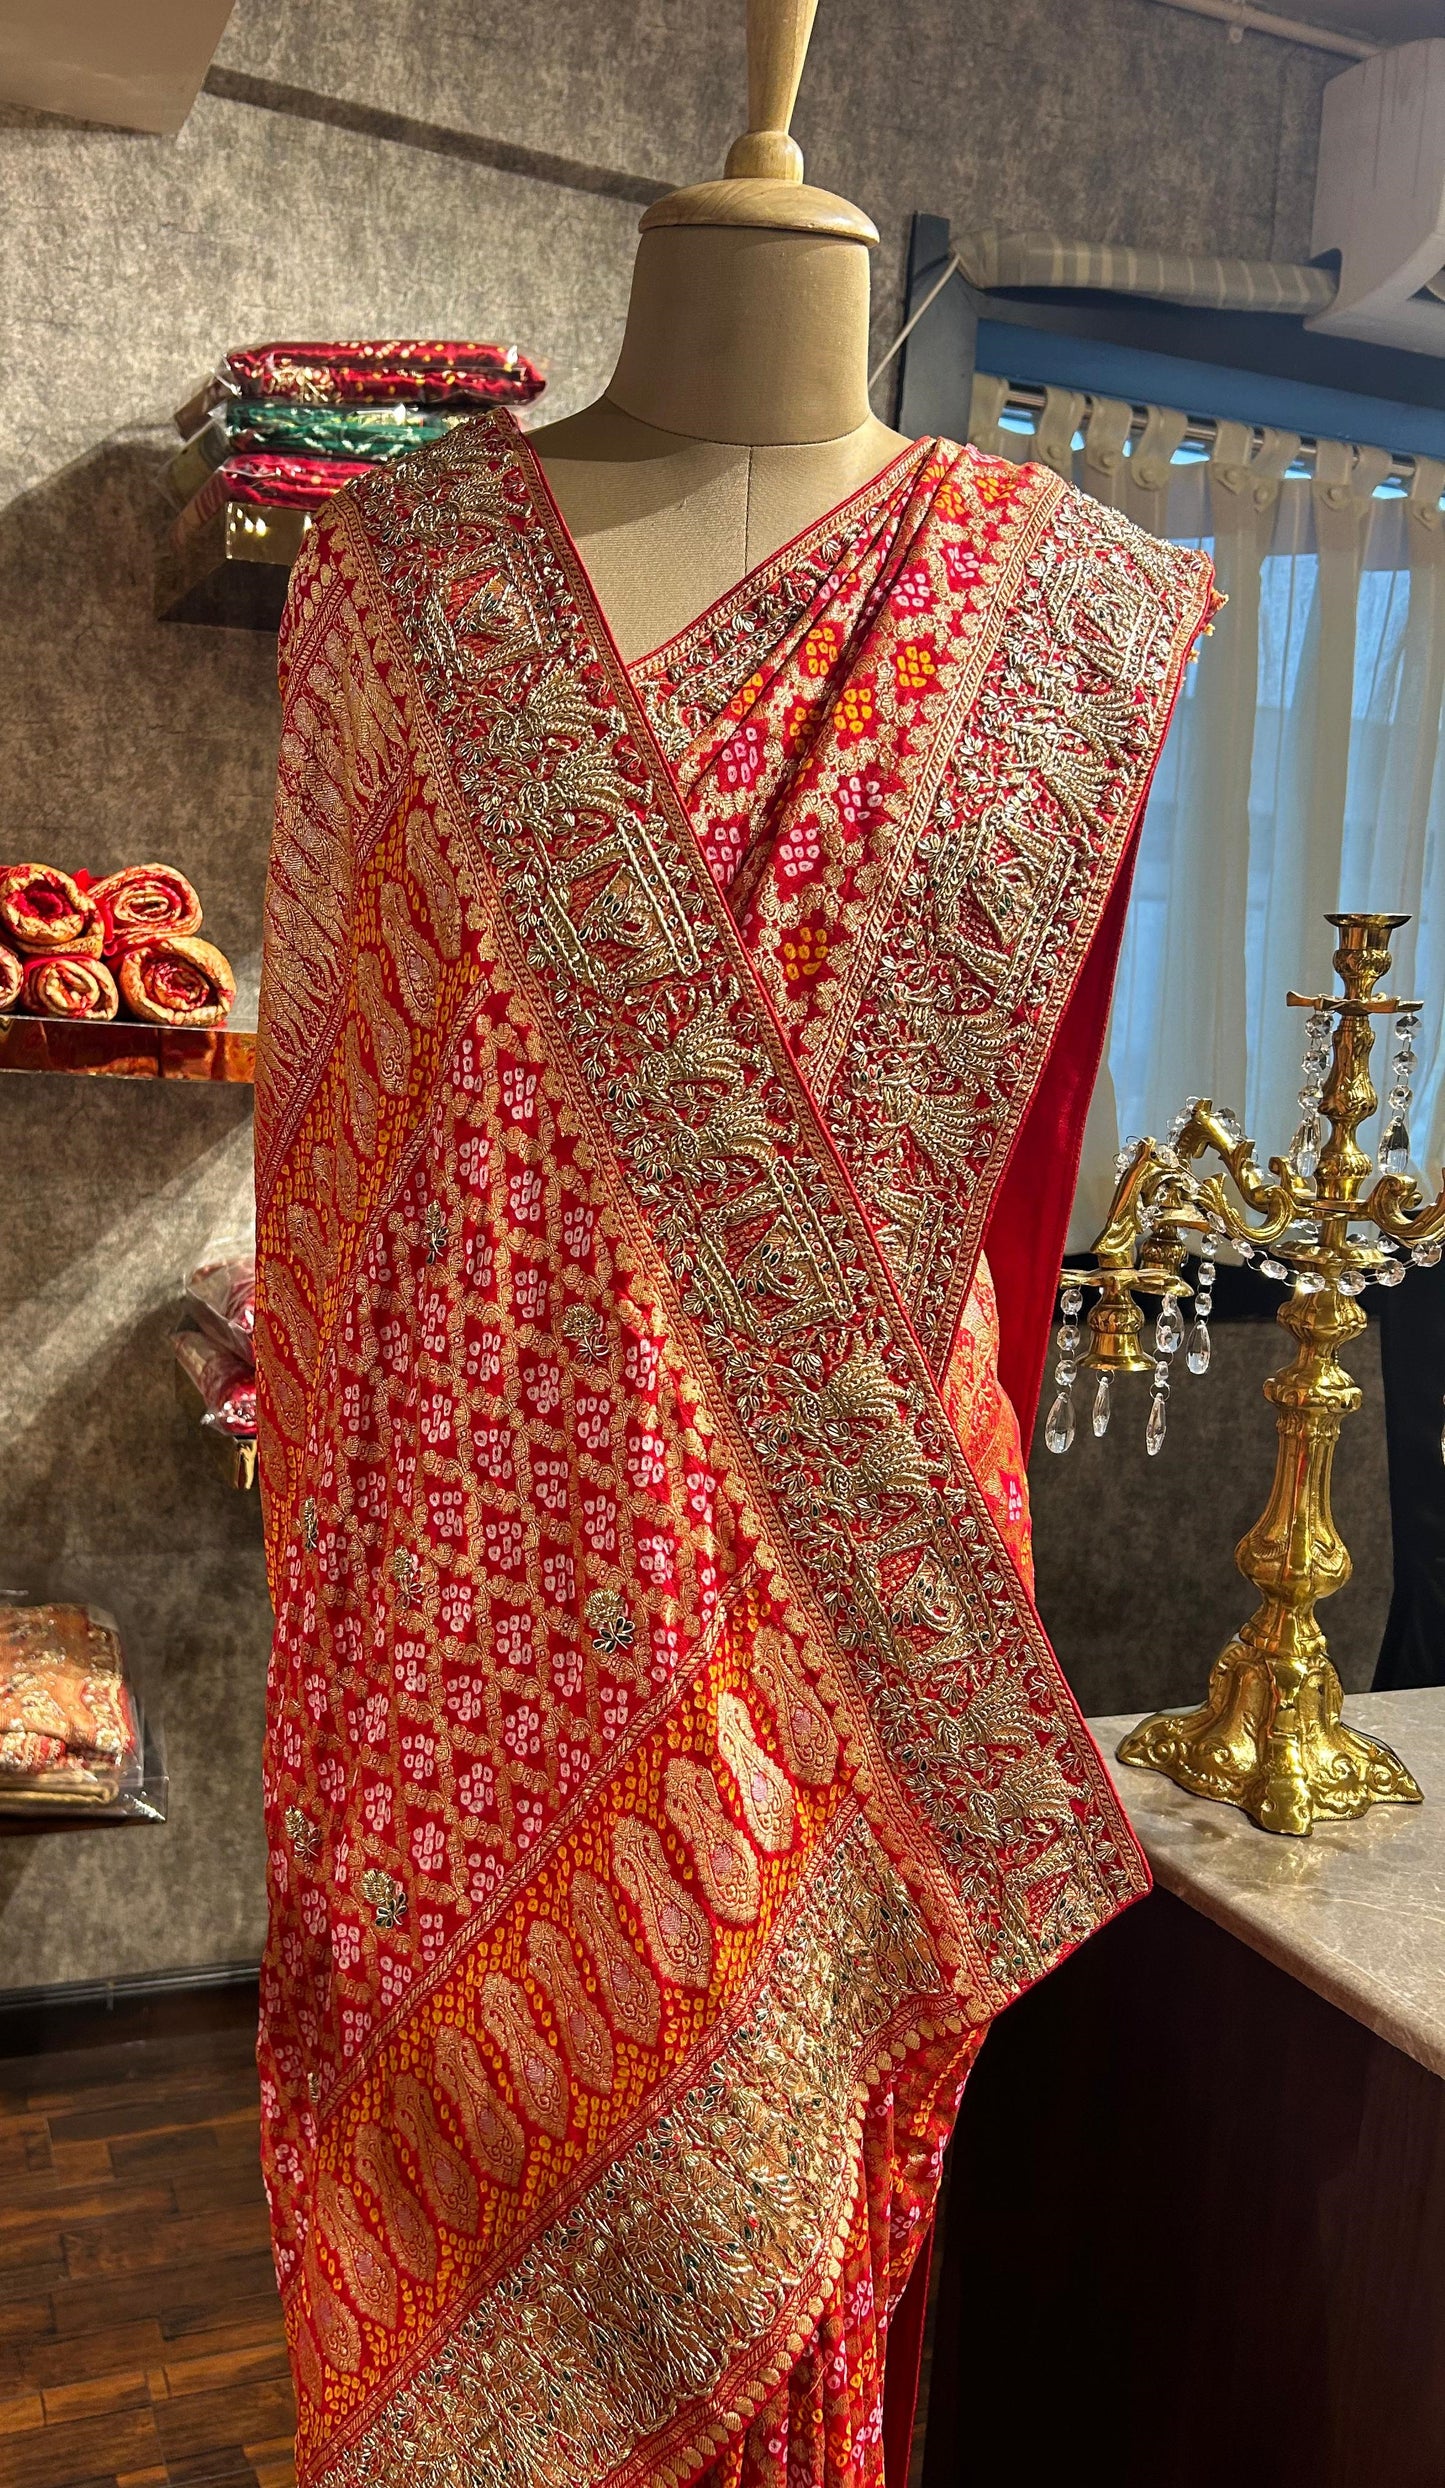 A PURE RED EMBROIDERED BANDHANI SAREE GH-278